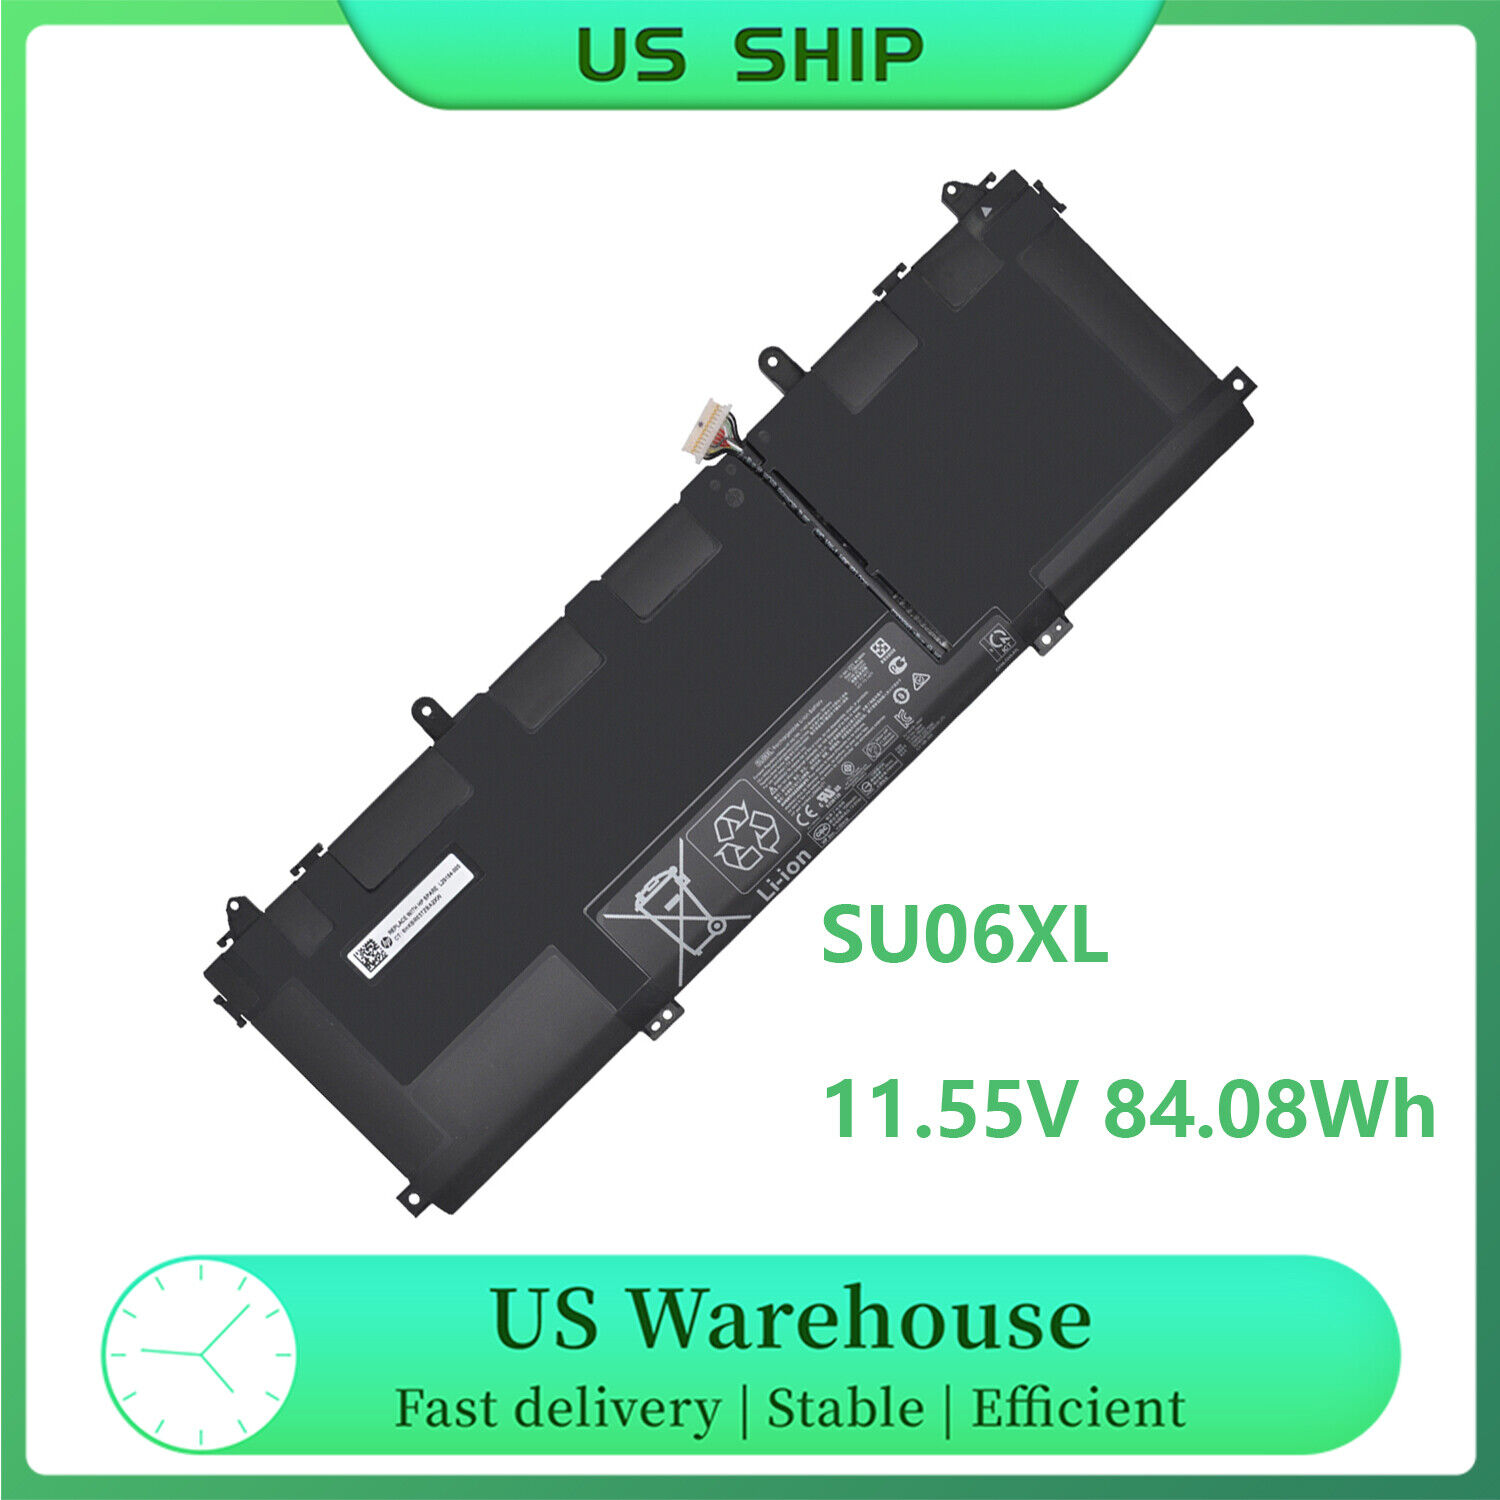 New SU06XL battery for HP Spectre x360 15 DF0013DX DF0033DX DF0008CA DF1020CA